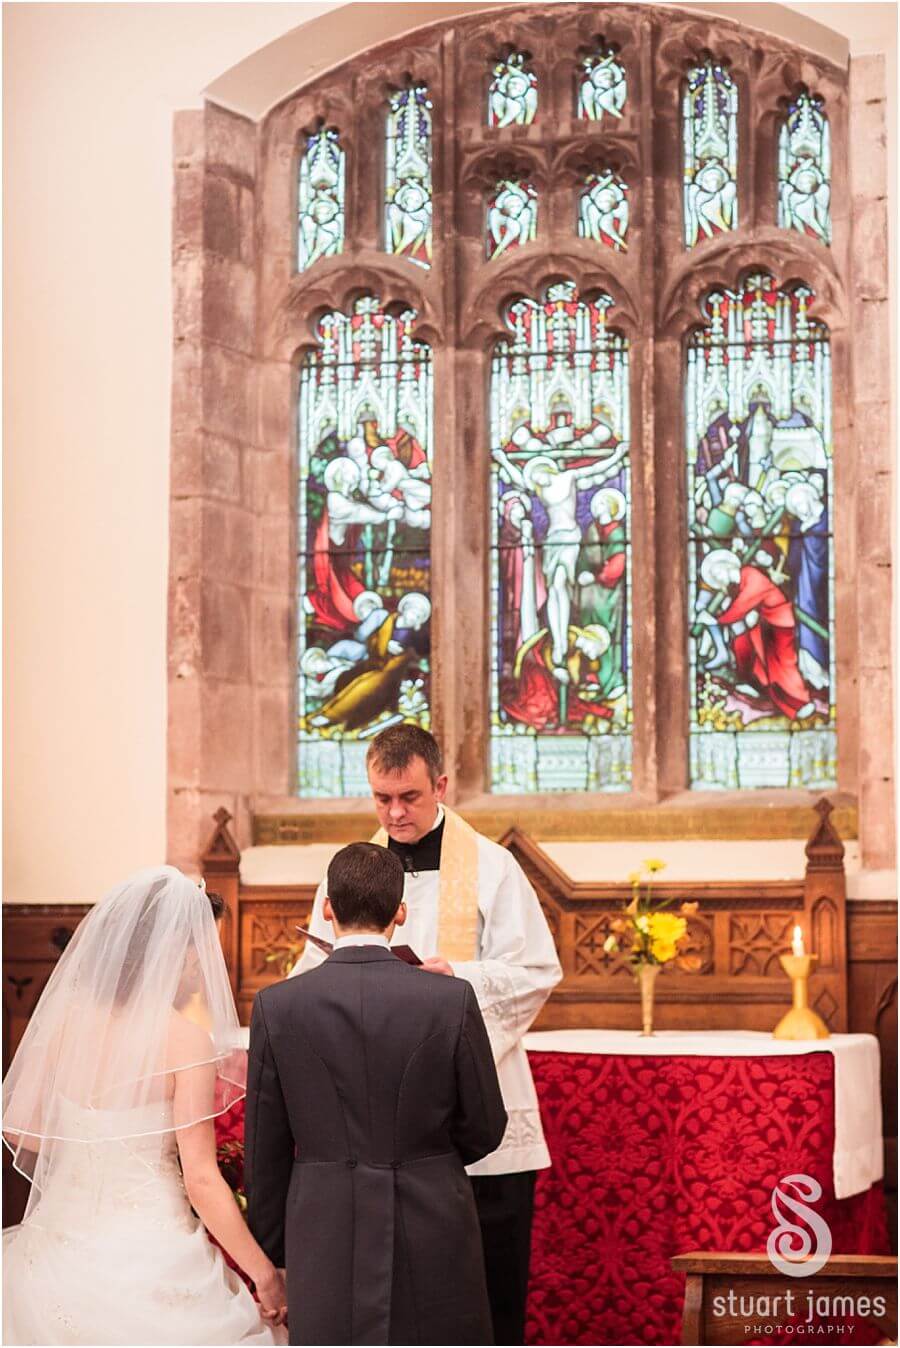 Wedding blessing at Church in grounds of Muncaster Castle in Cumbria captured by Reportage Wedding Photographer Stuart James